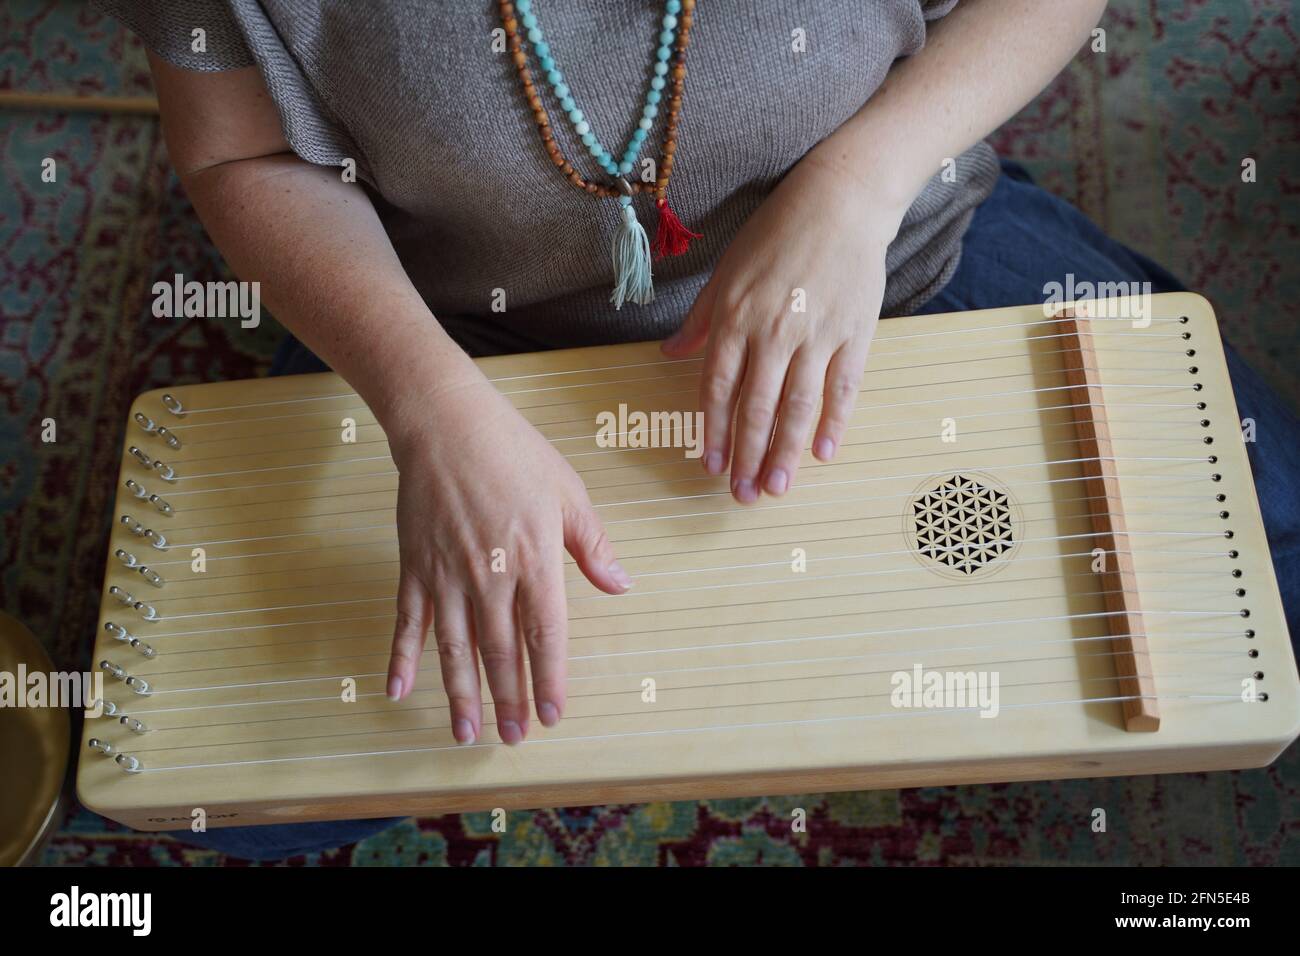 Woman holding a monochord, sound healing instrument in a therapy session. Stock Photo